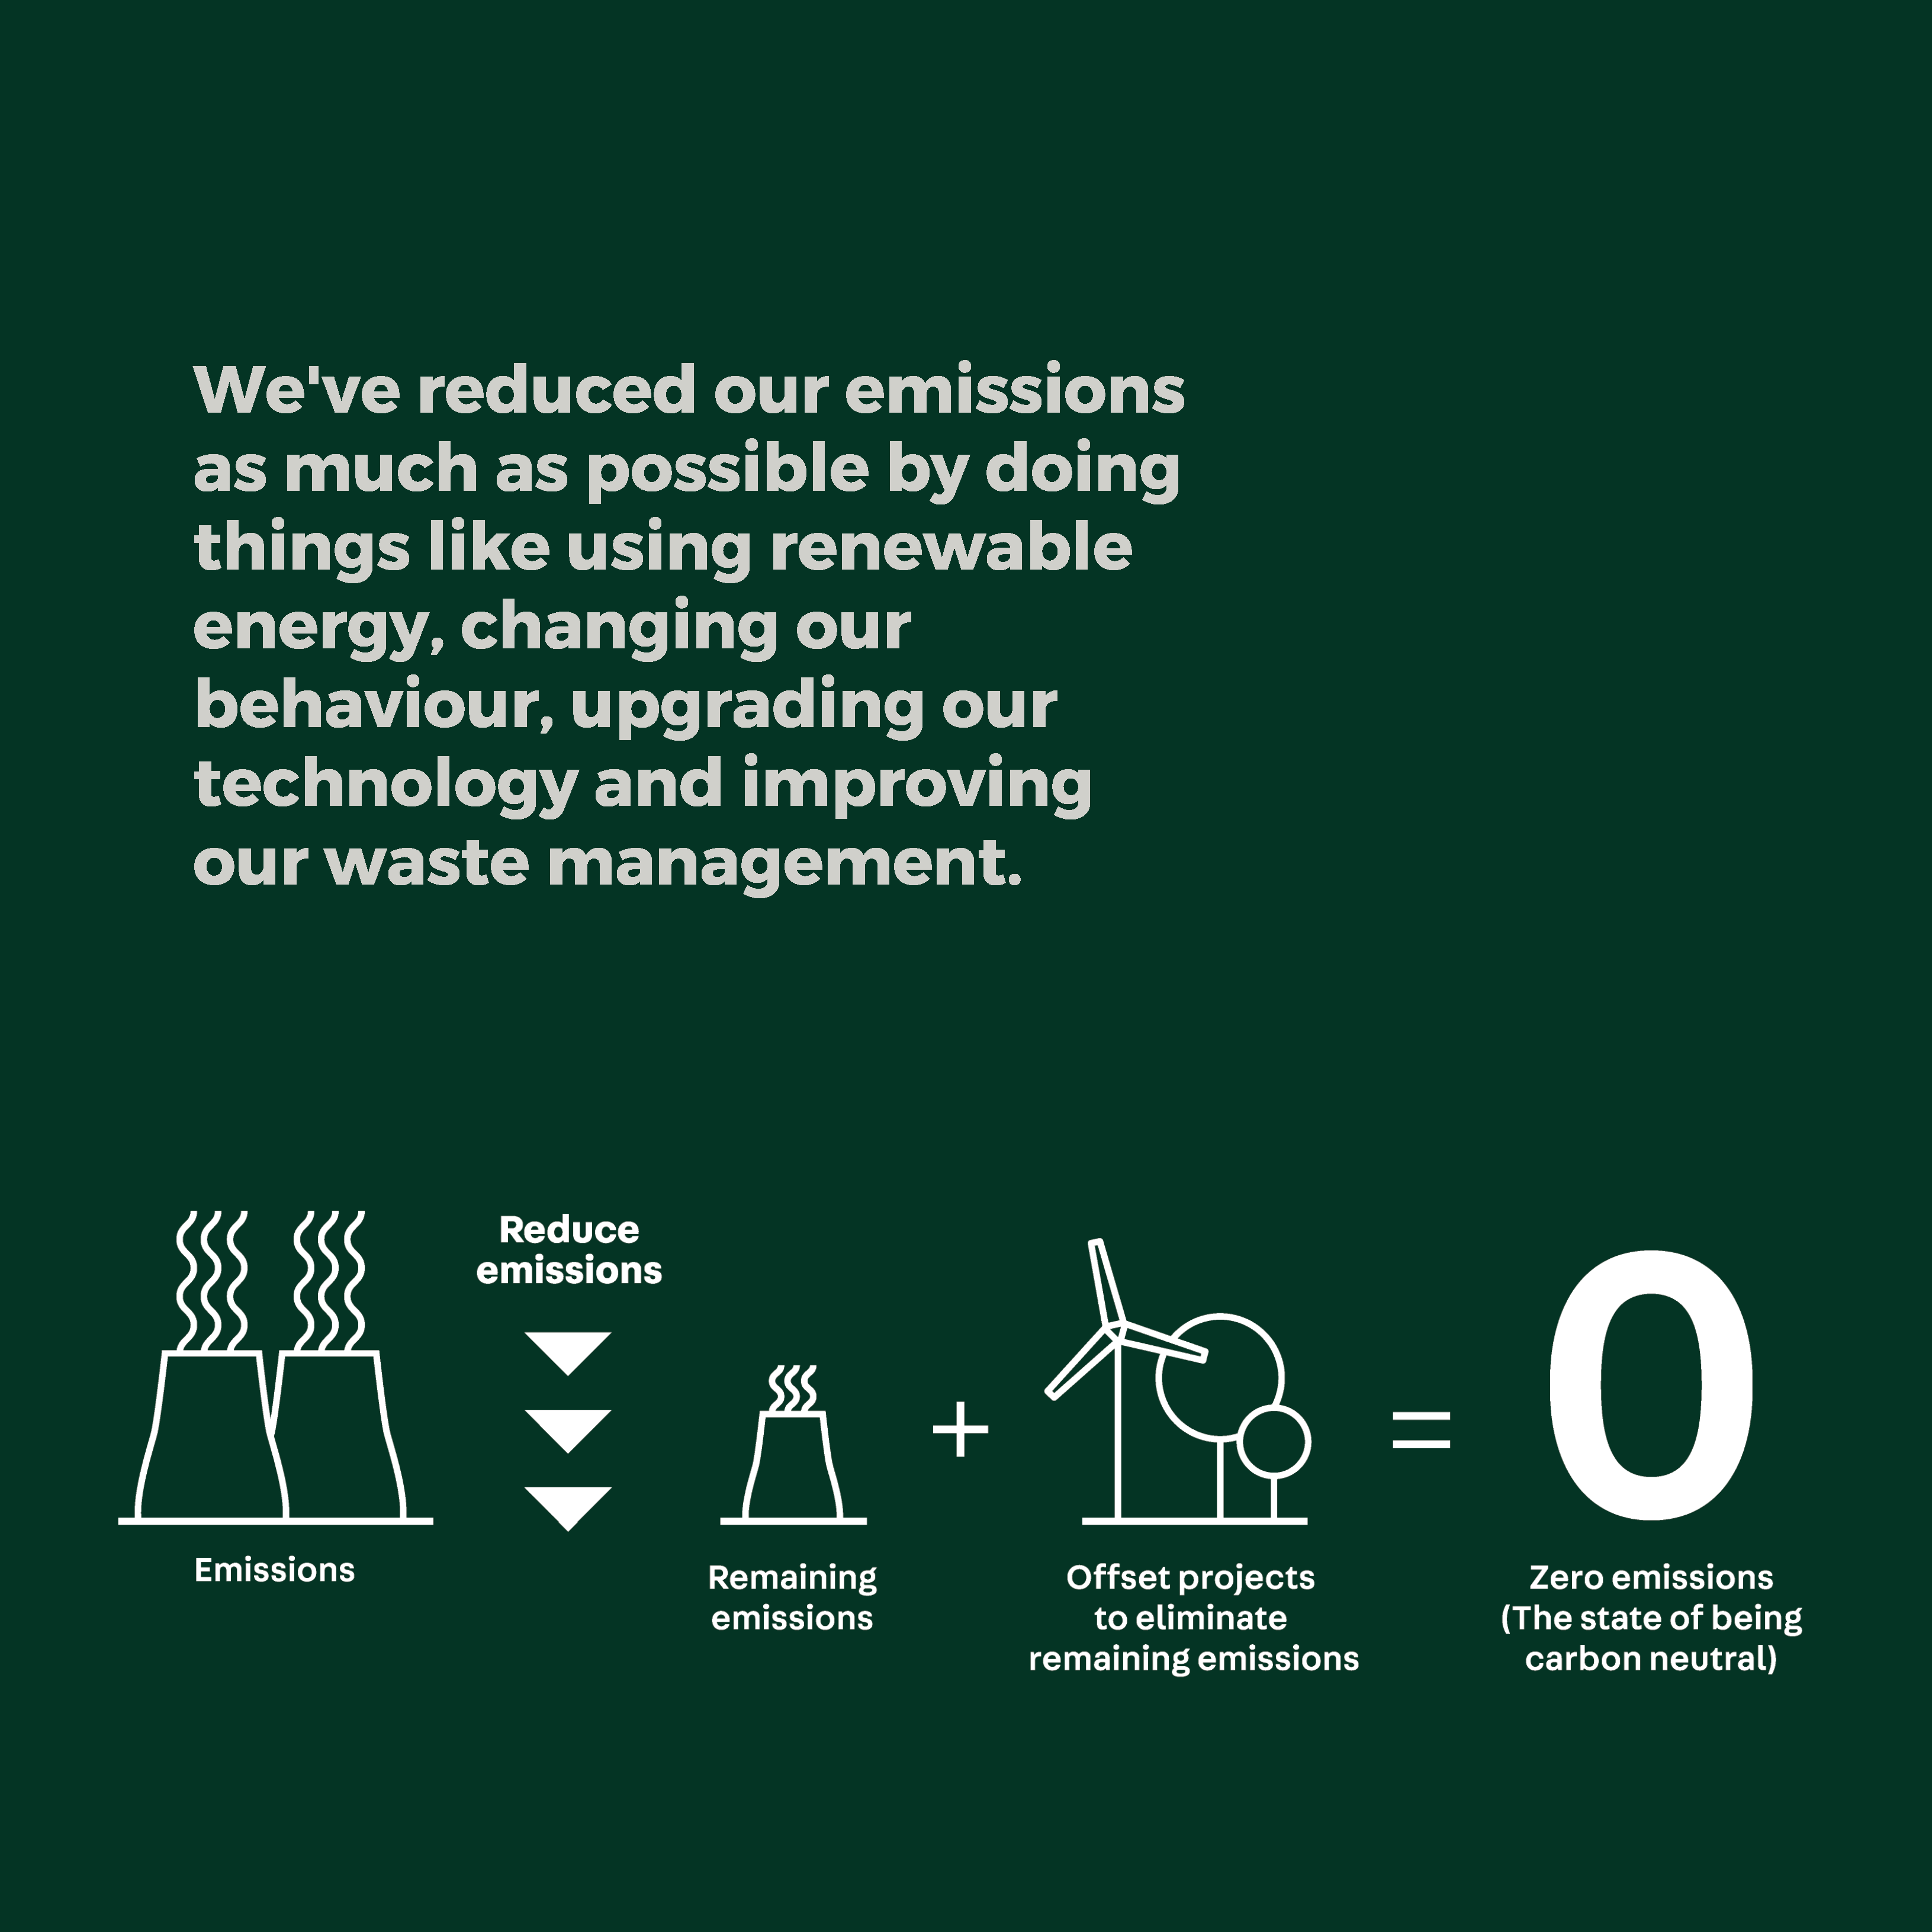 Green Moves reducing emissions